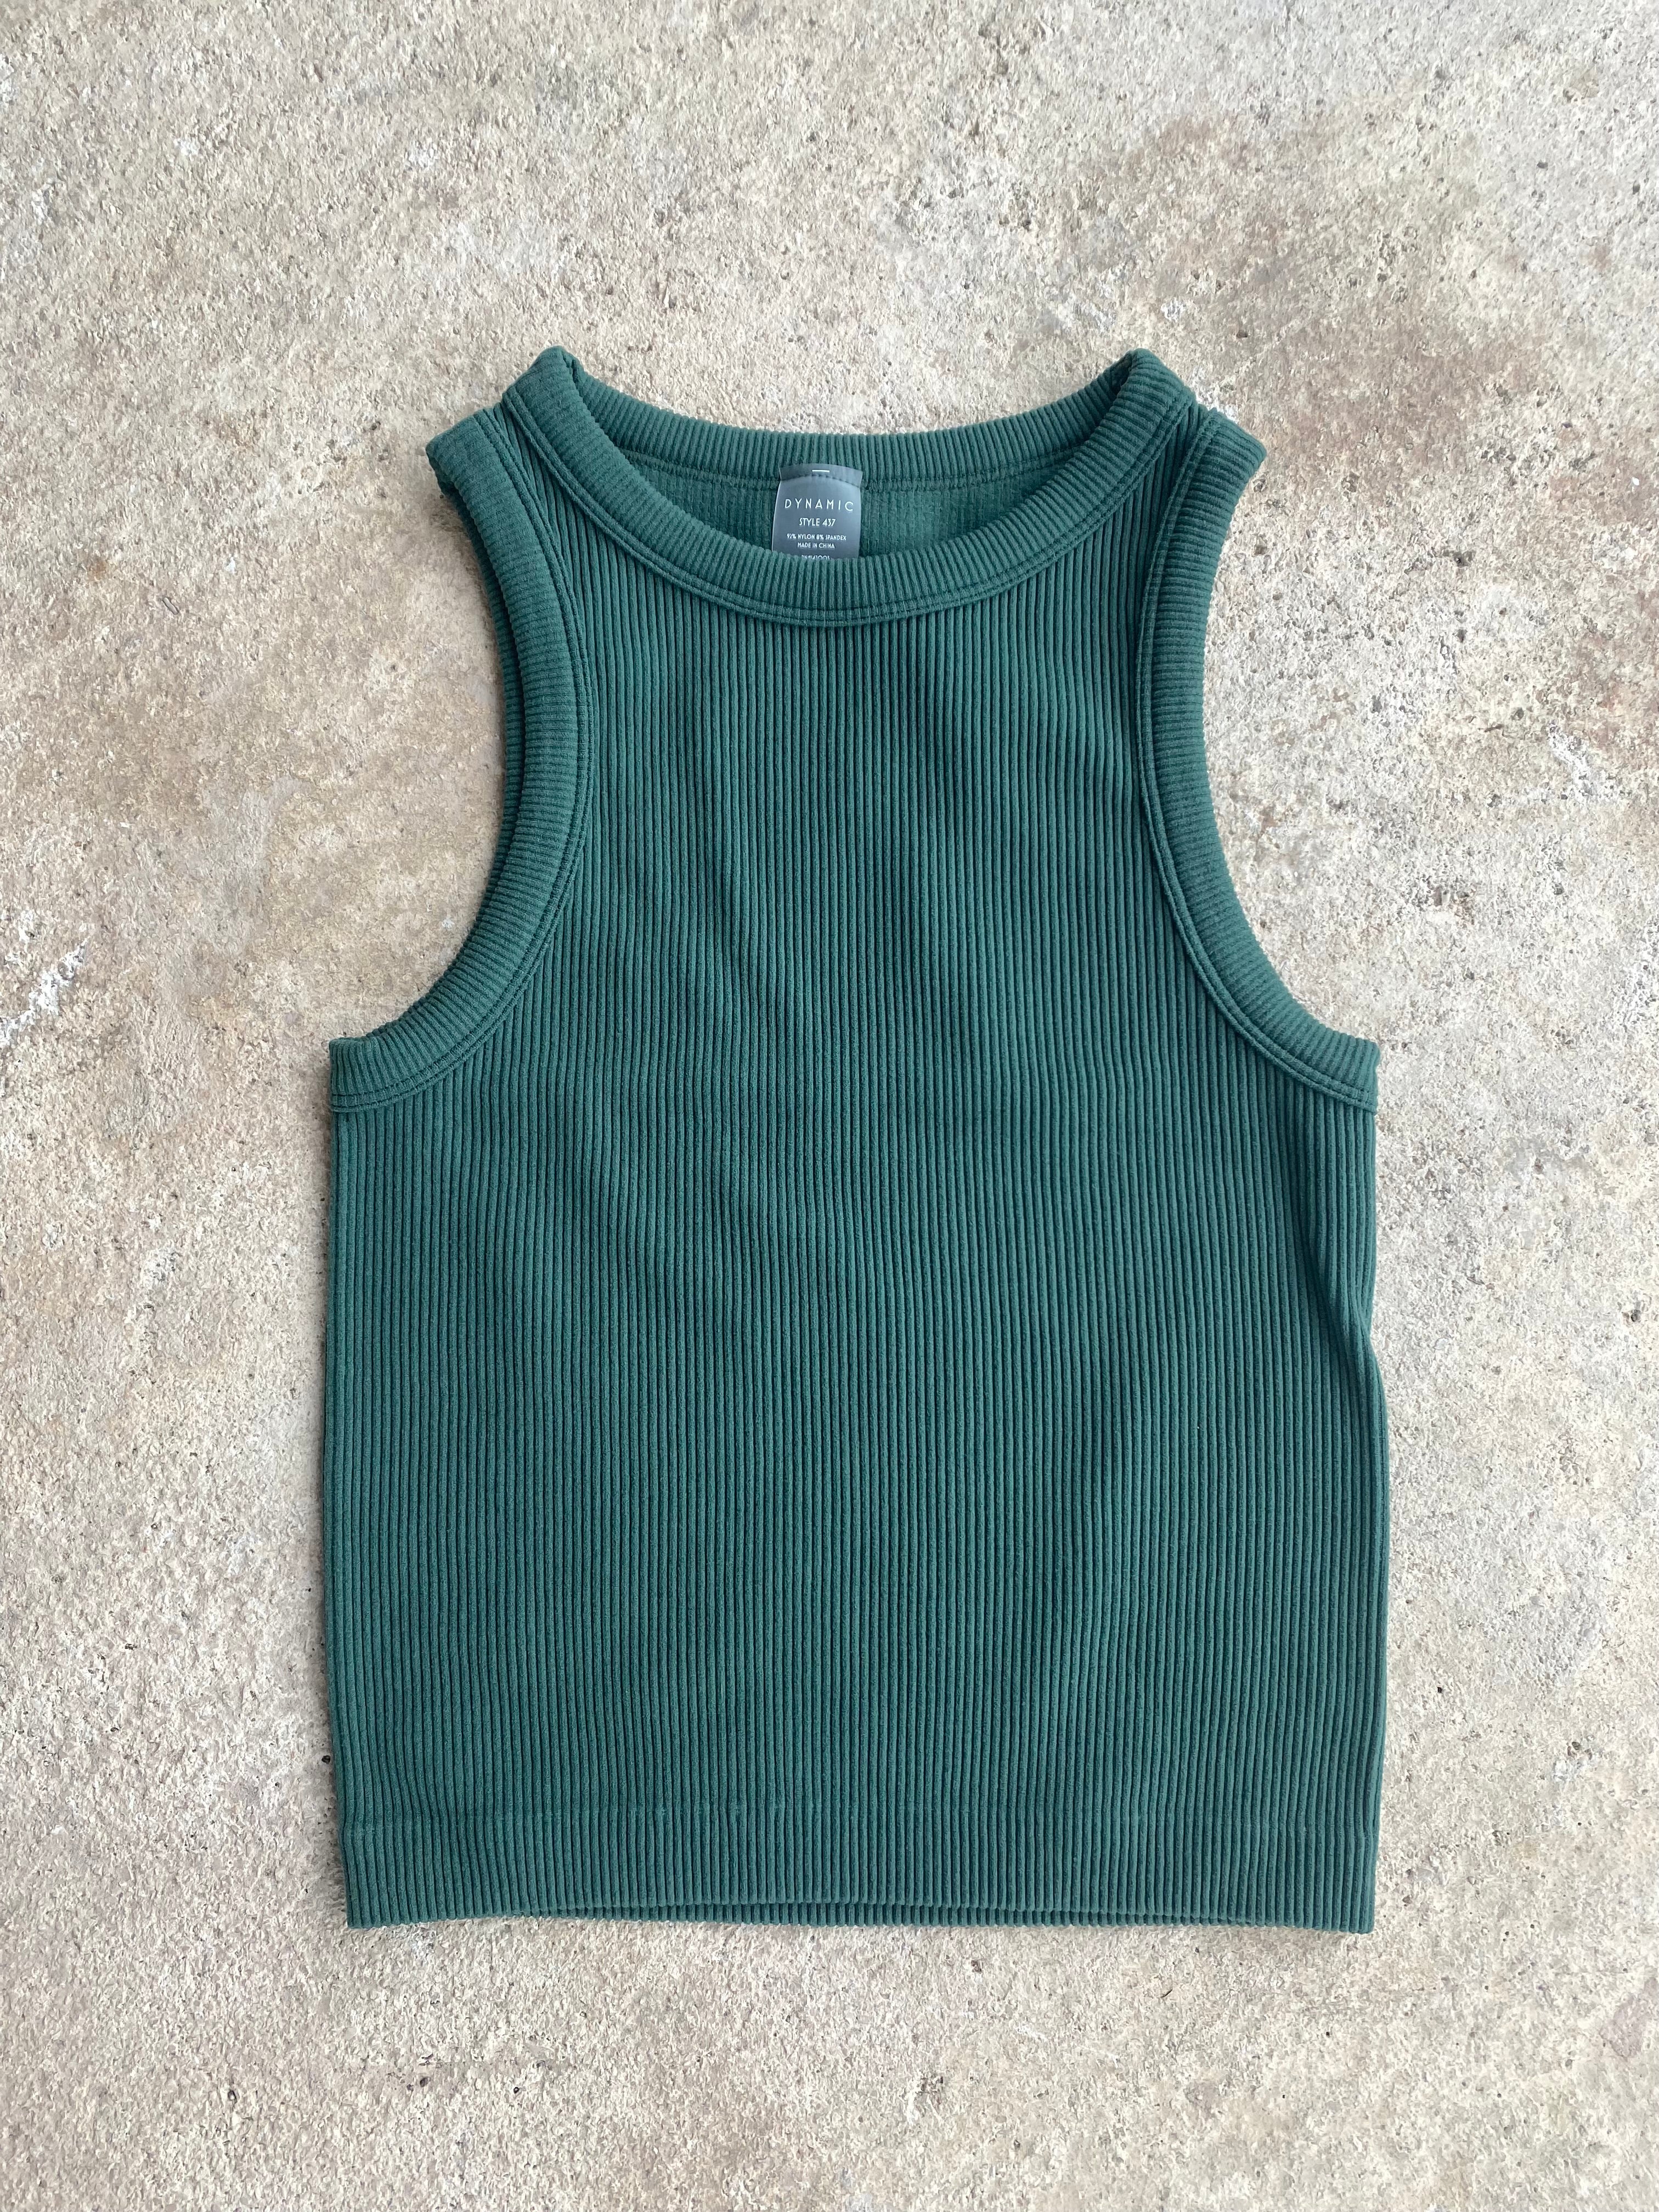 Basics Forest Top